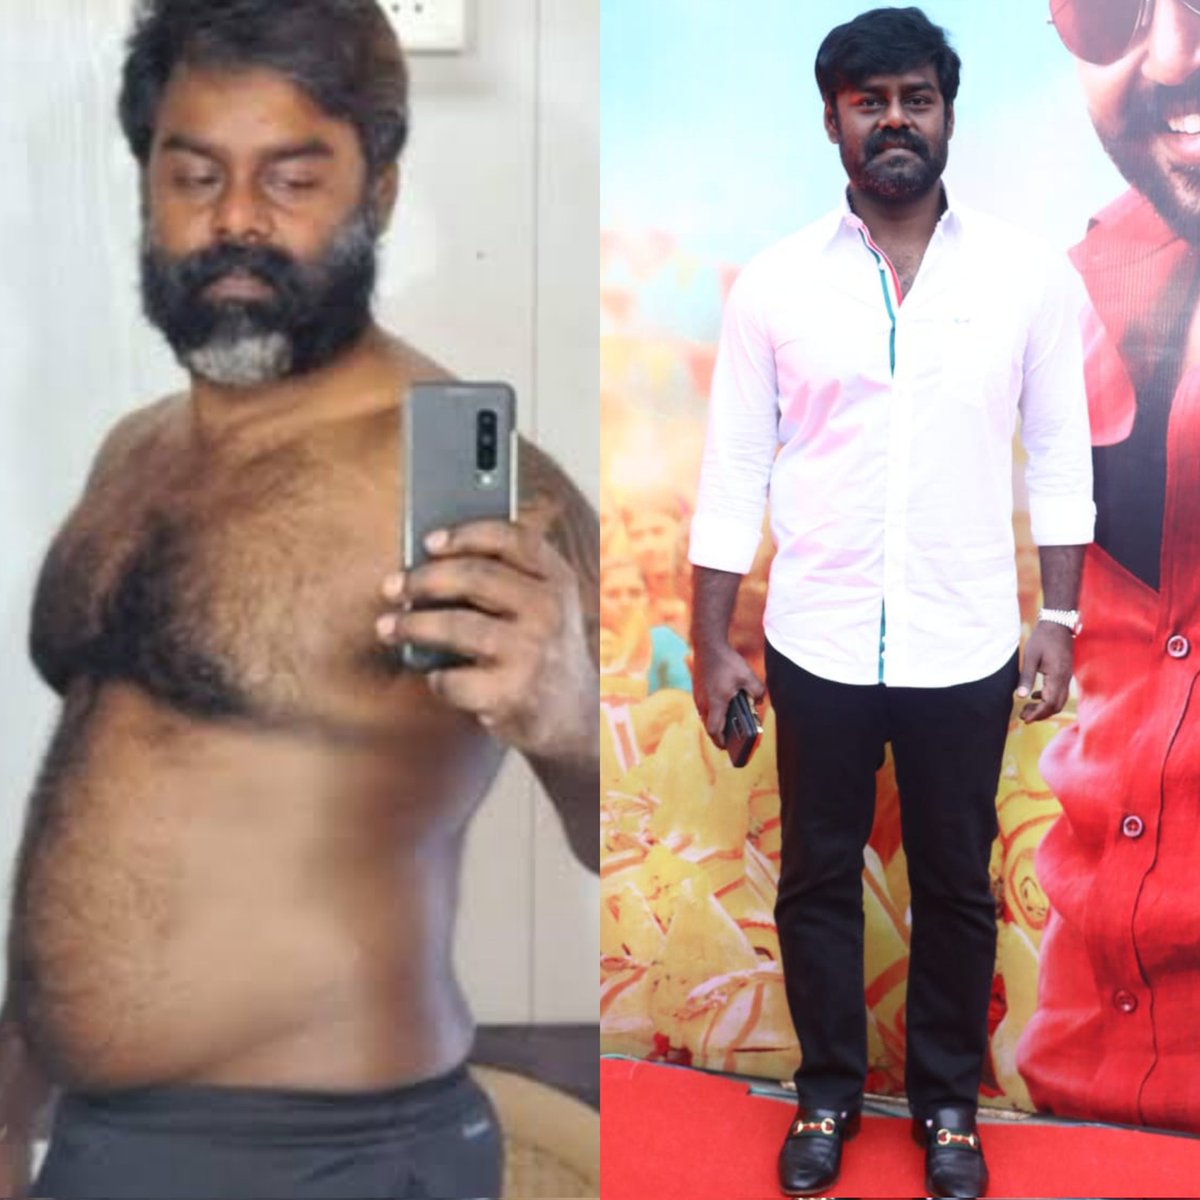 Noted @studio9_suresh bro's transformation from visithiran movie  to now 😵 what a transformation 🔥 felt like sharing ❤️